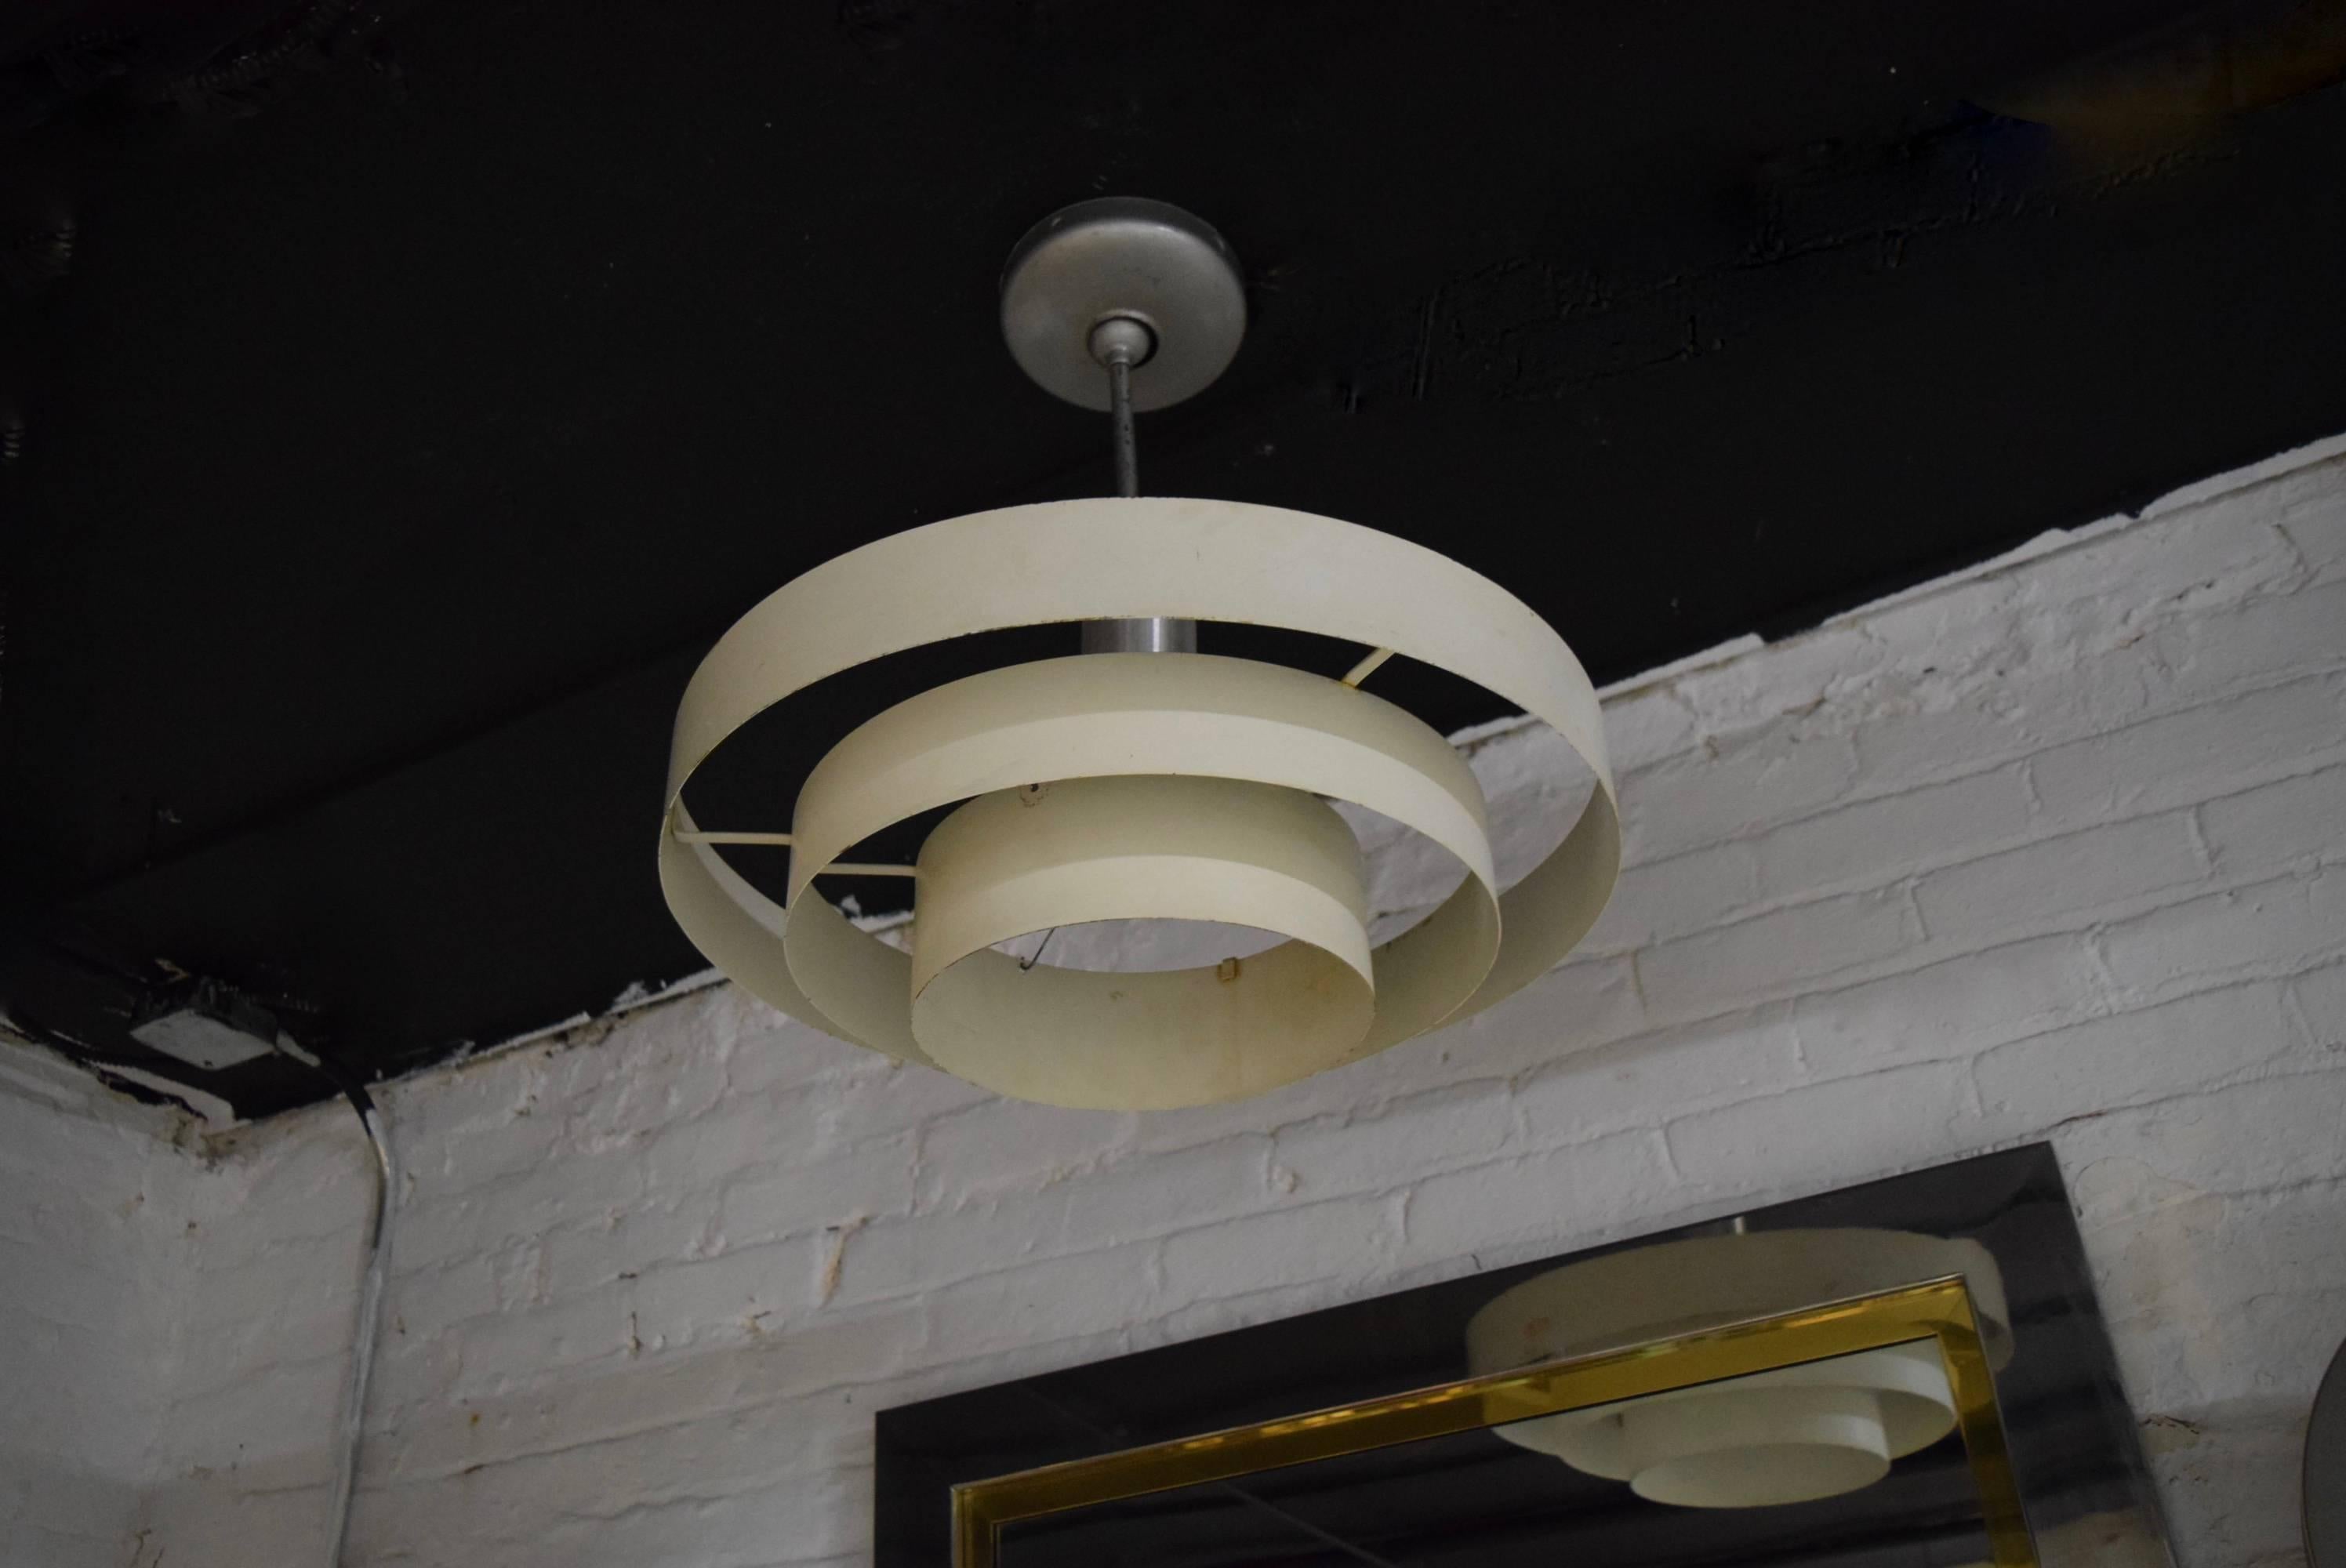 Ceiling fixture has a single centred standard socket with a stainless defuser surrounded by three rings of off-white enameled metal each graduating in size. The fixture has original stem and canopy.